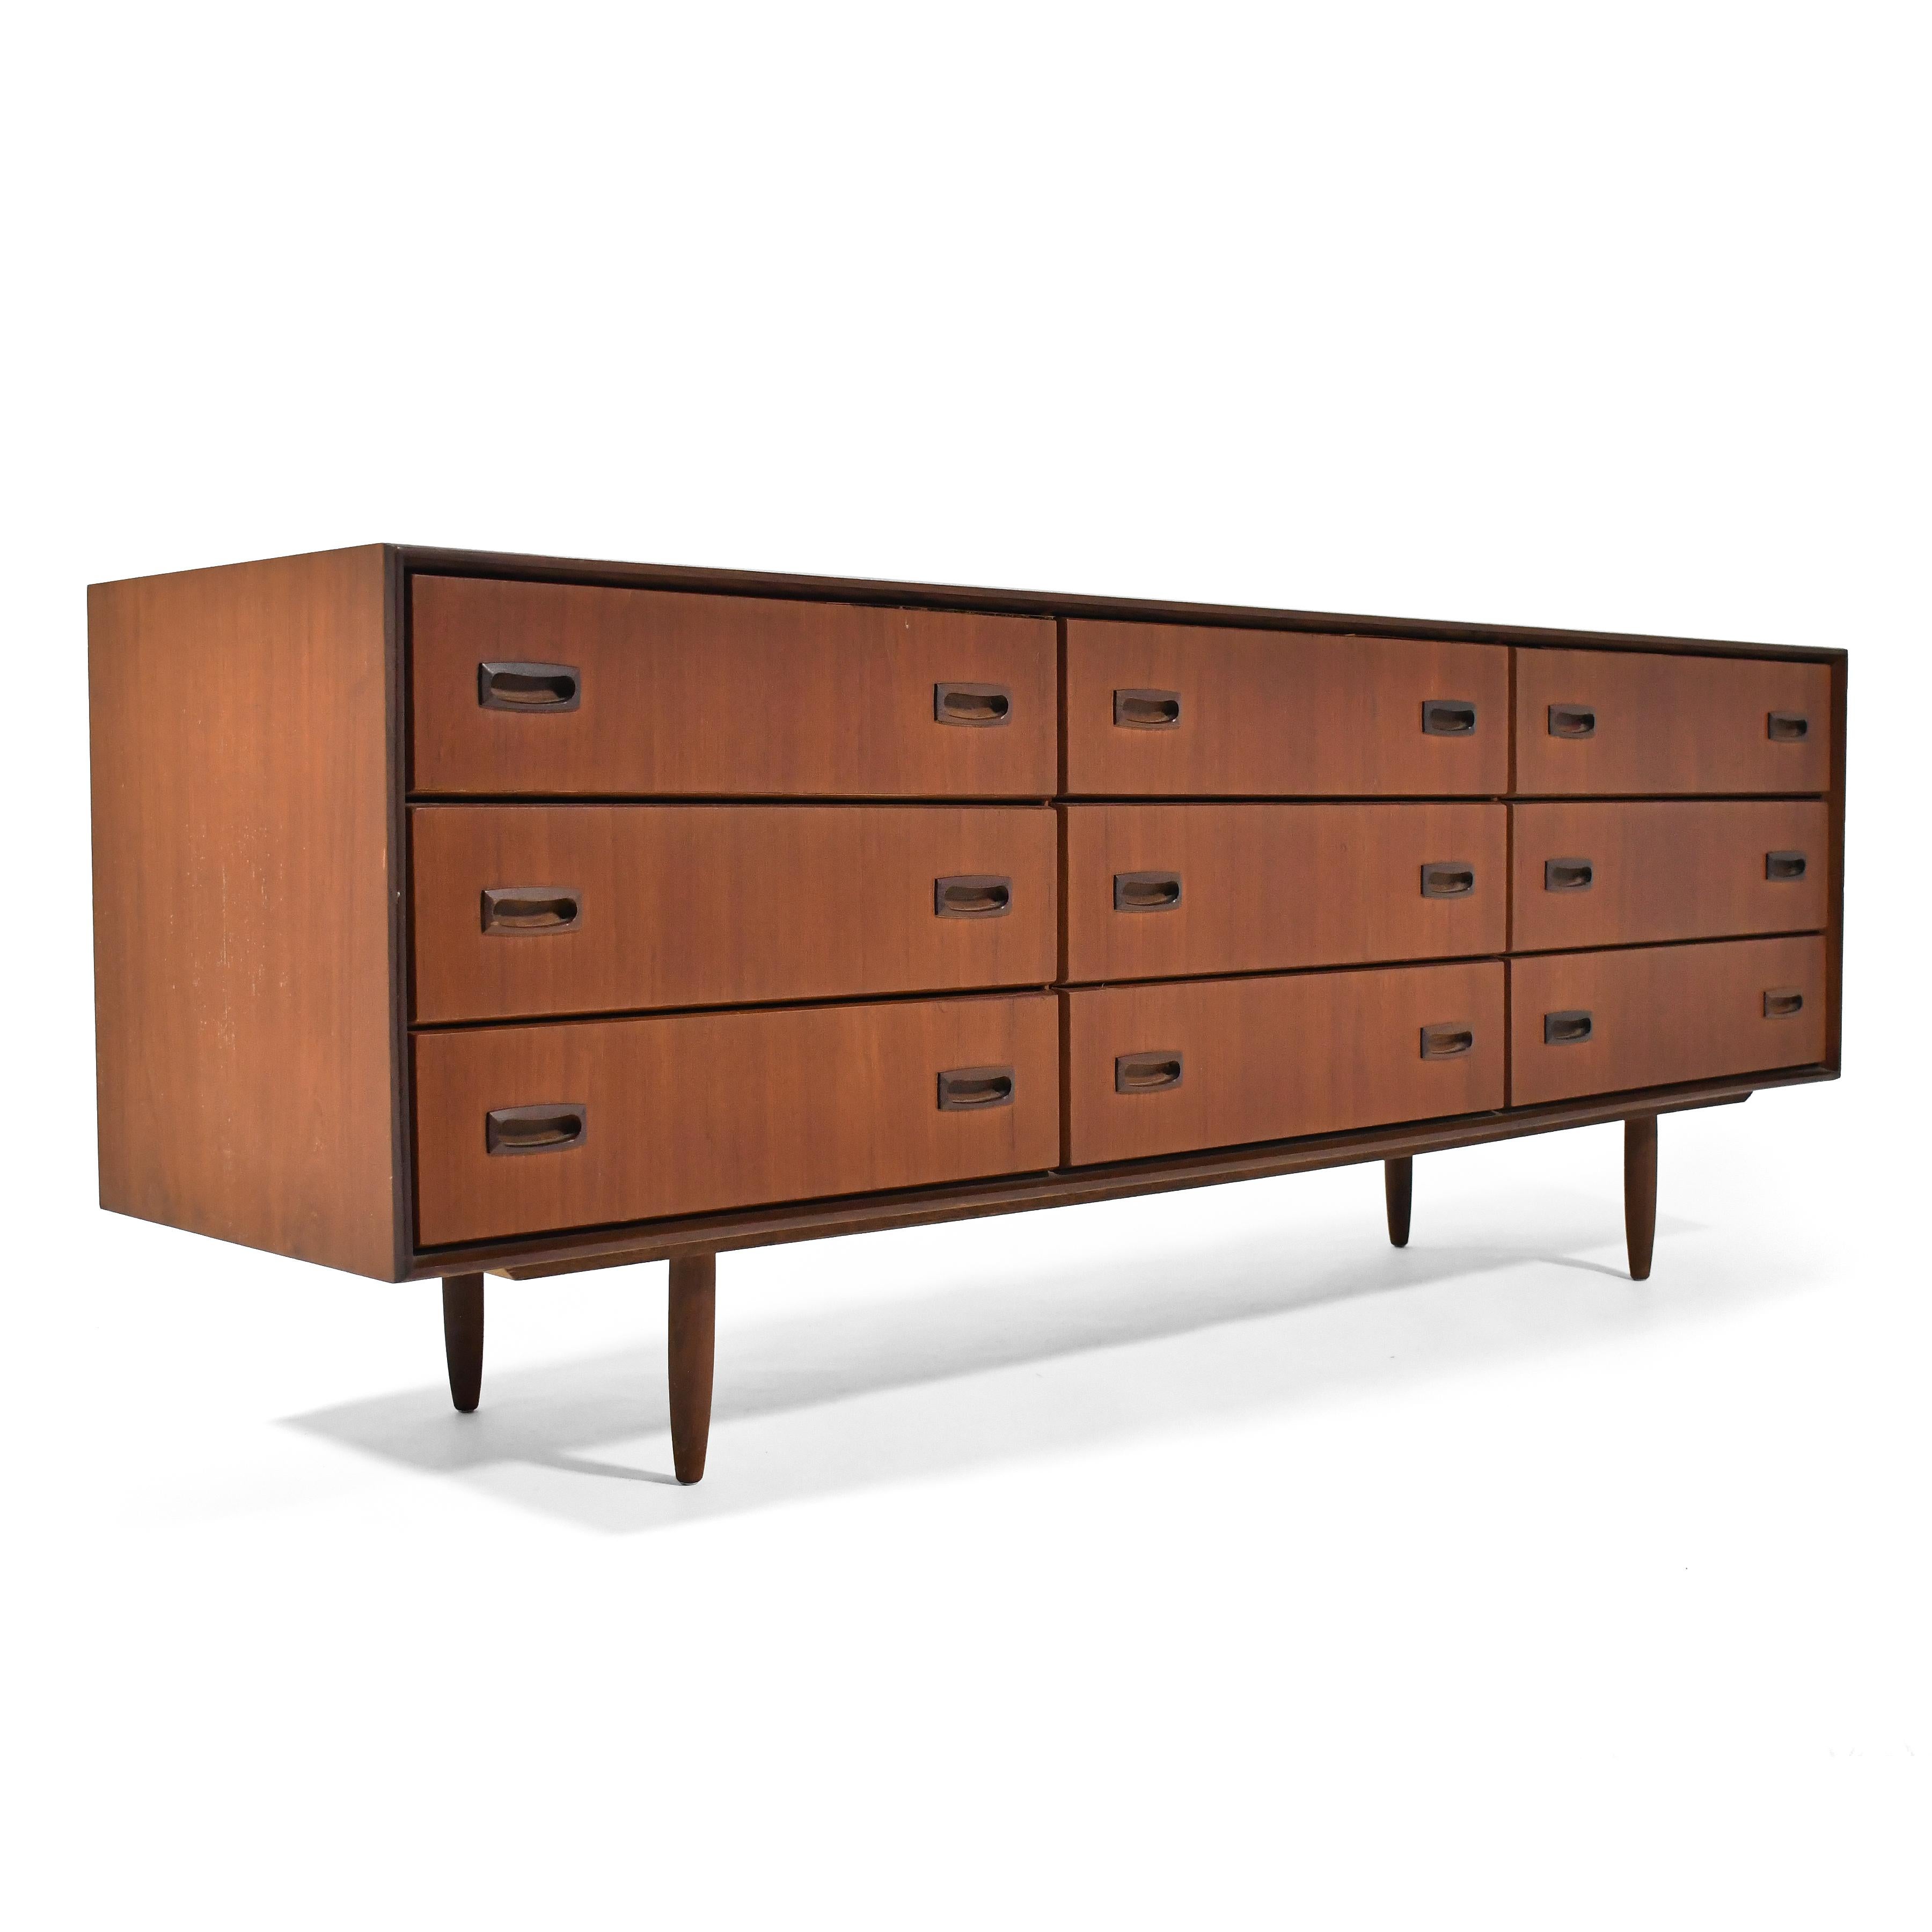 This nicely tailored cabinet in teak features nine drawers with sculptural pulls and beveled drawer-fronts all supported by tapered legs.

28